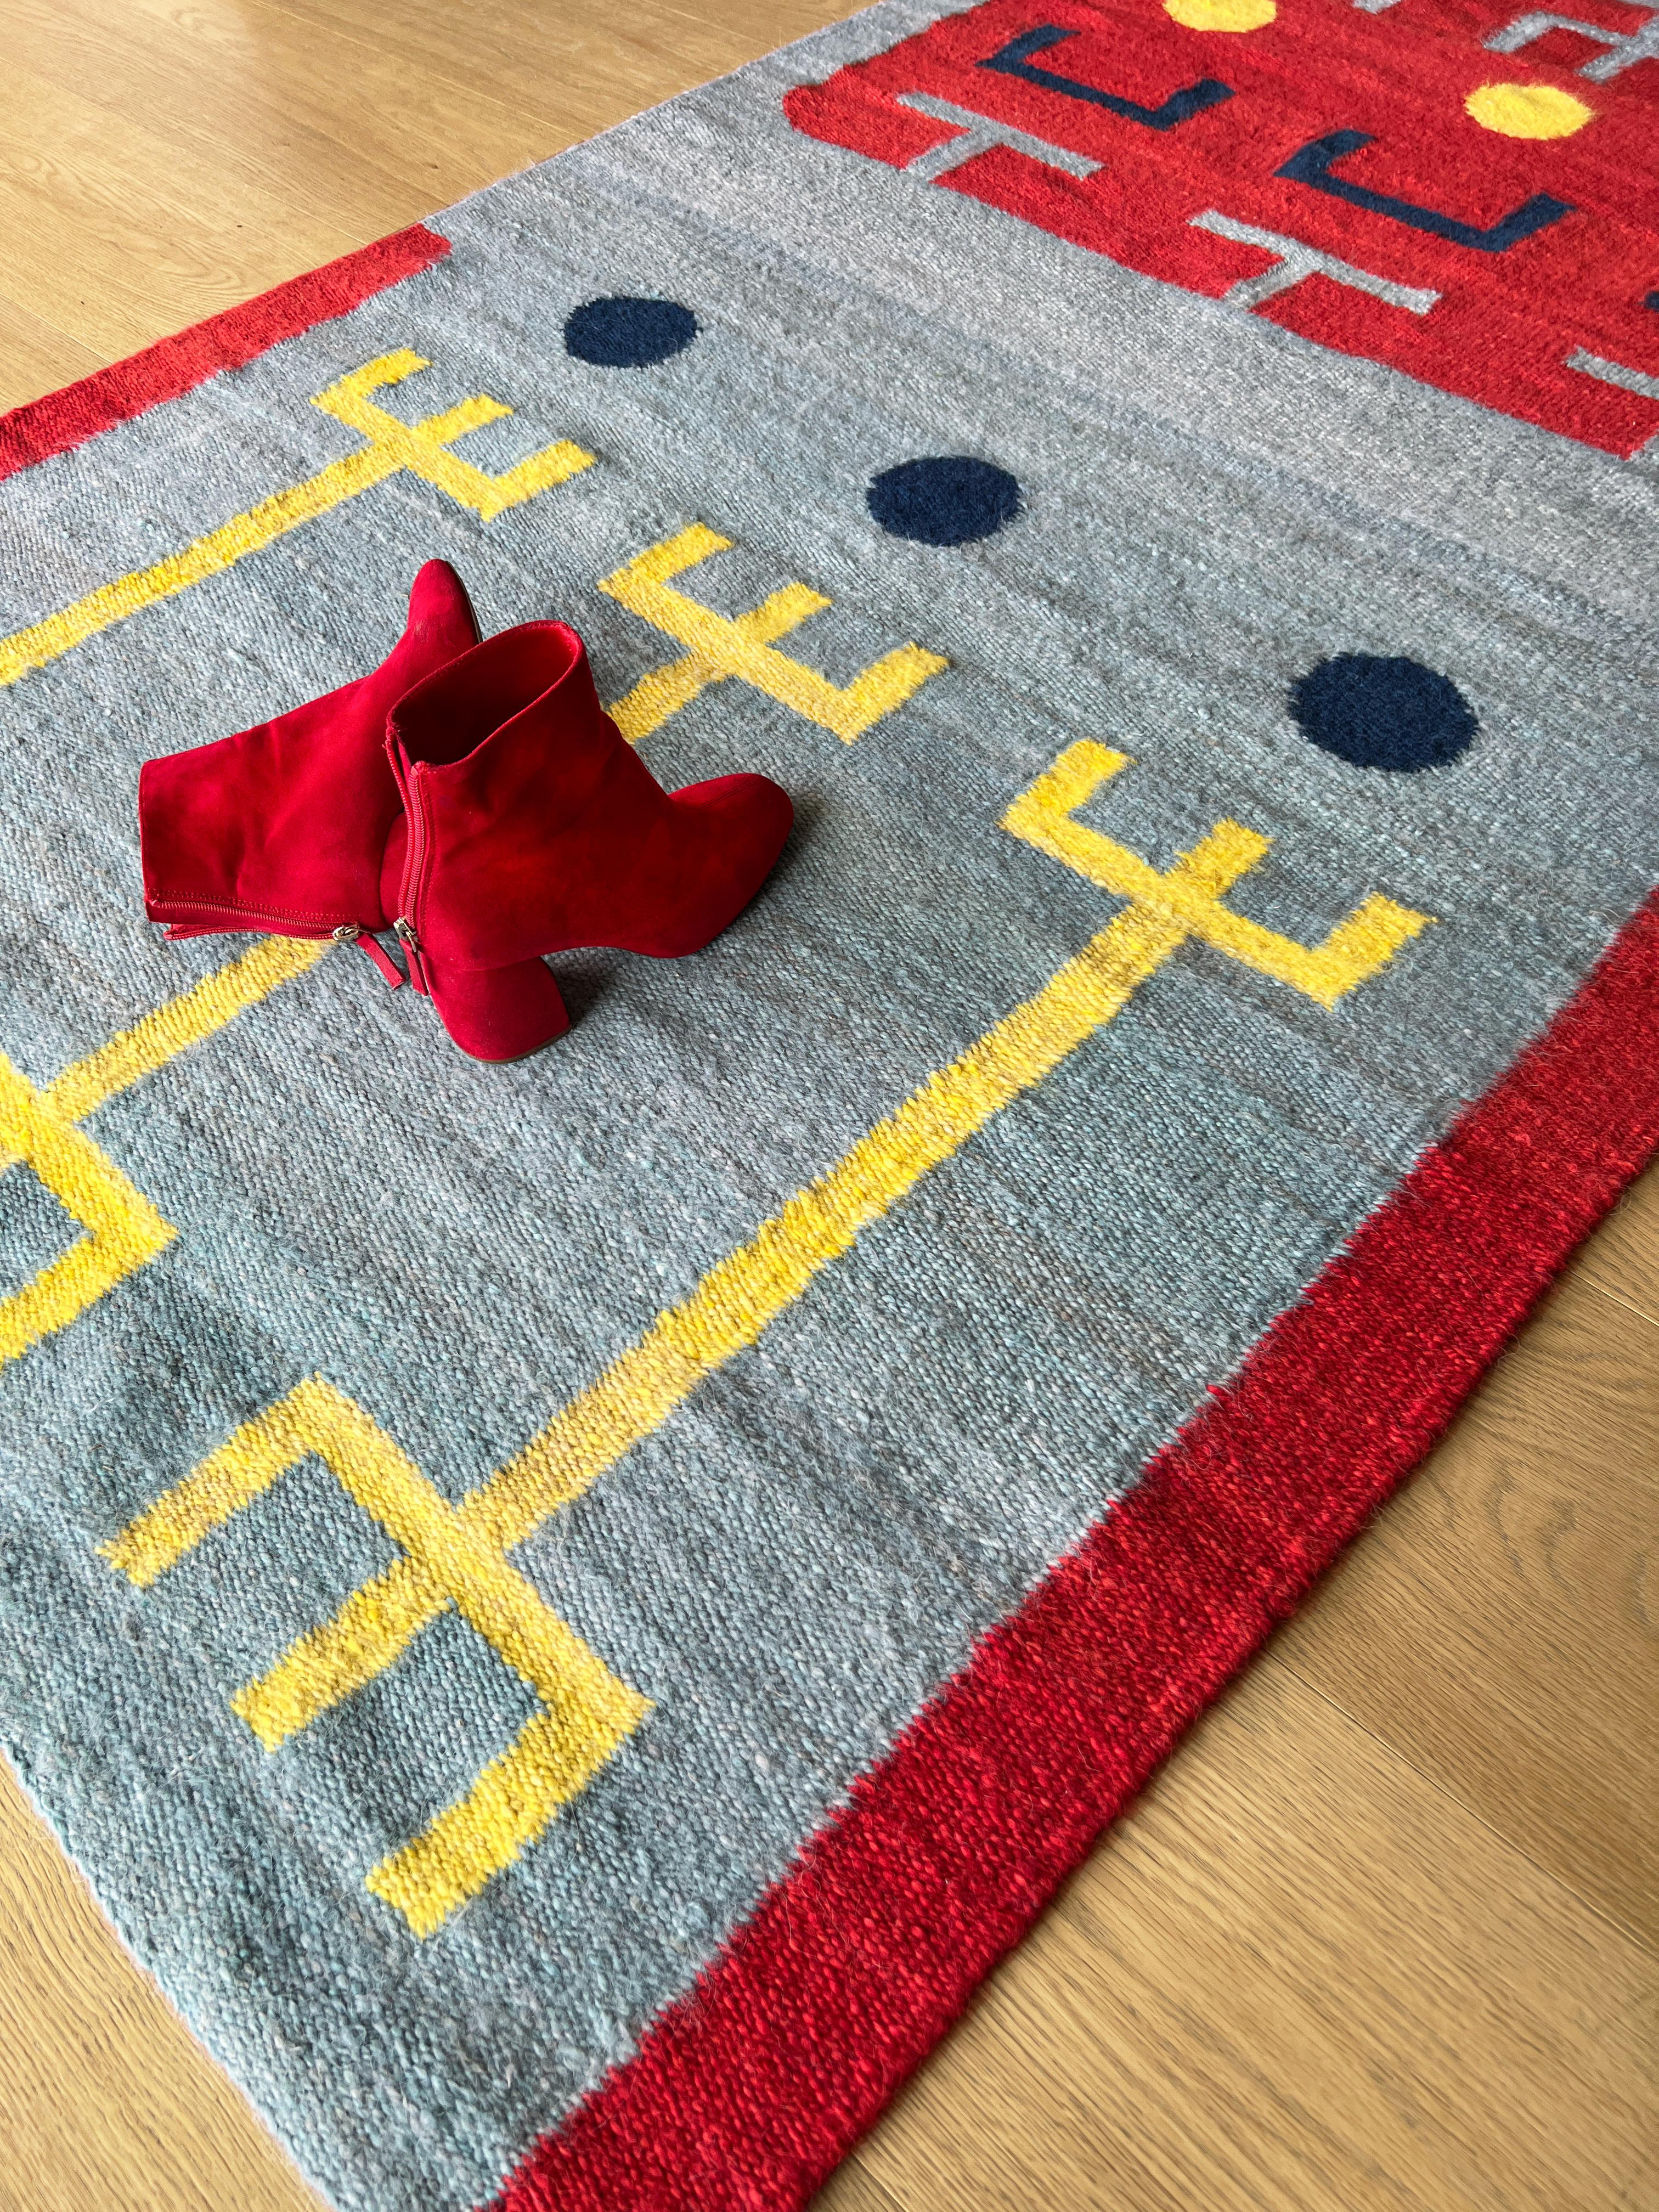 Adapted from the original design by Victor Grippo, Untitled, 1966.

Limited edition of 8 handmade and unique rugs.   

LALANA RUGS is an applied arts initiative born from the desire to combine proposals by contemporary artists with traditional local